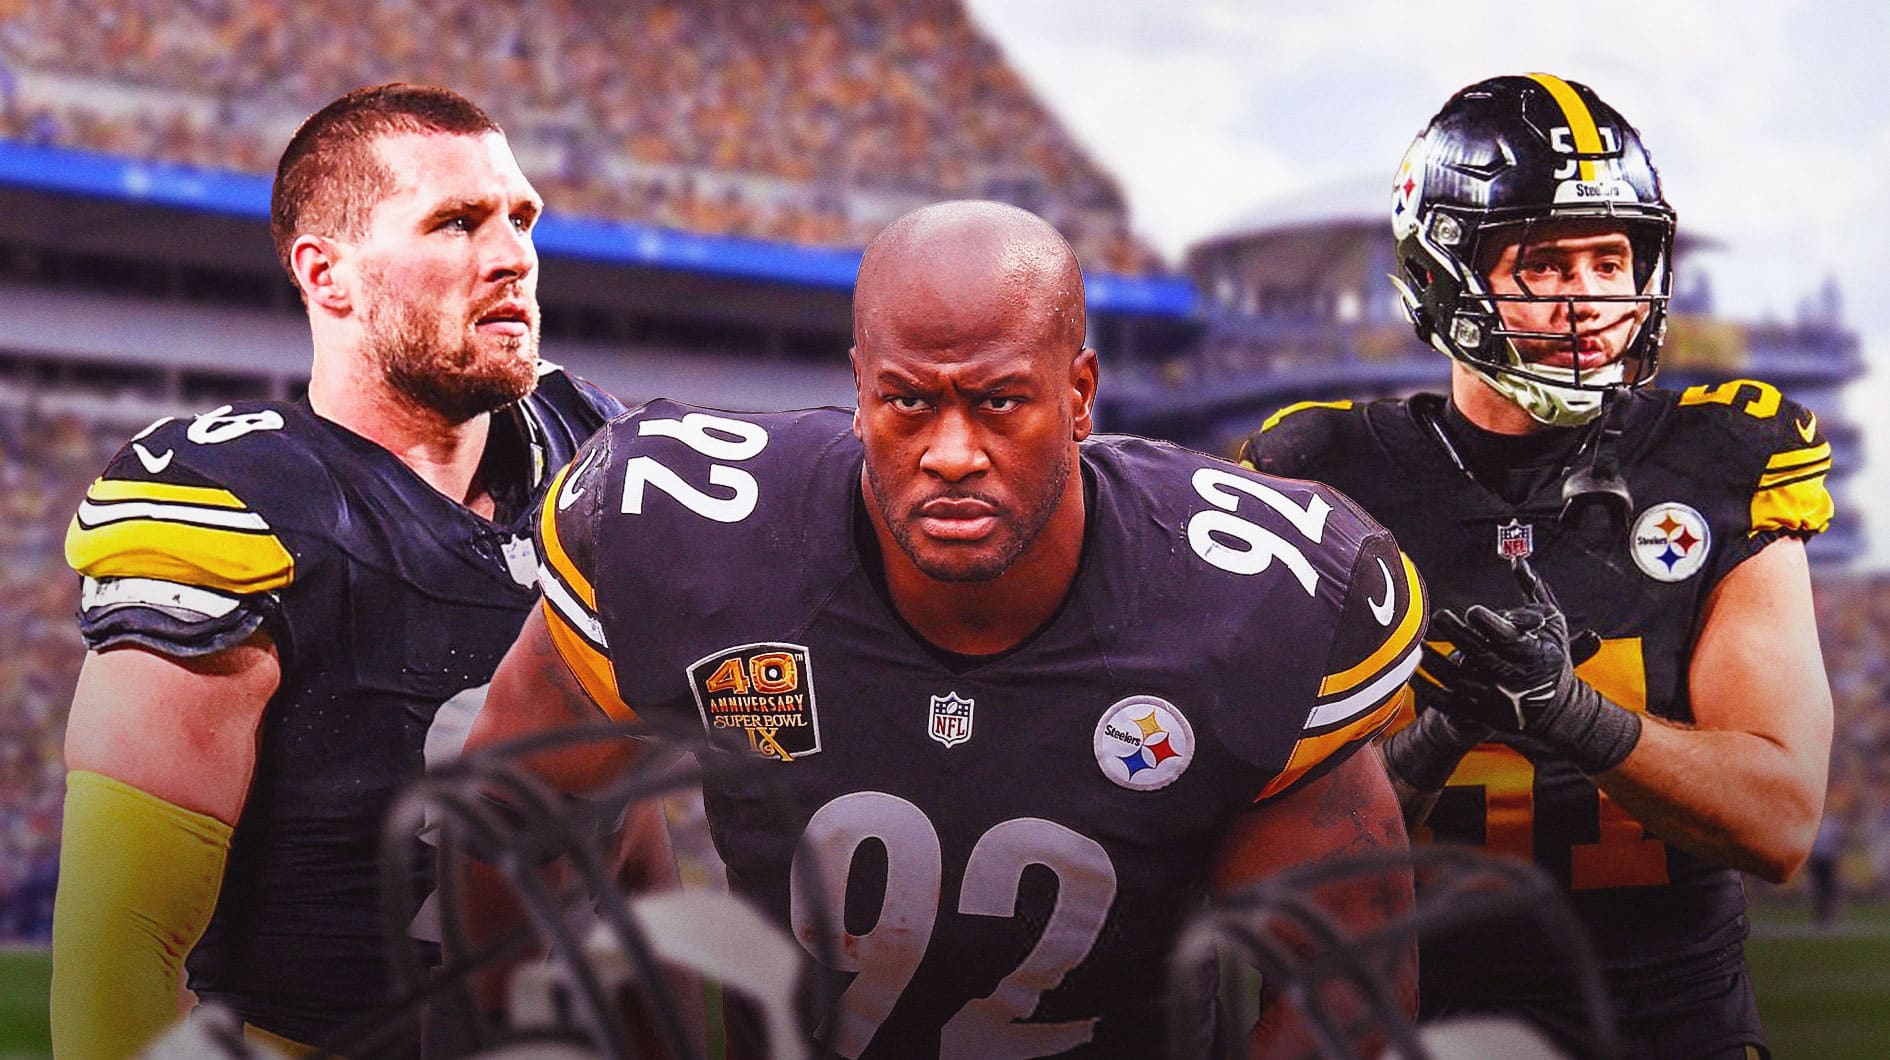 TJ Watt gets real about rising Steelers weapon learning from James Harrison